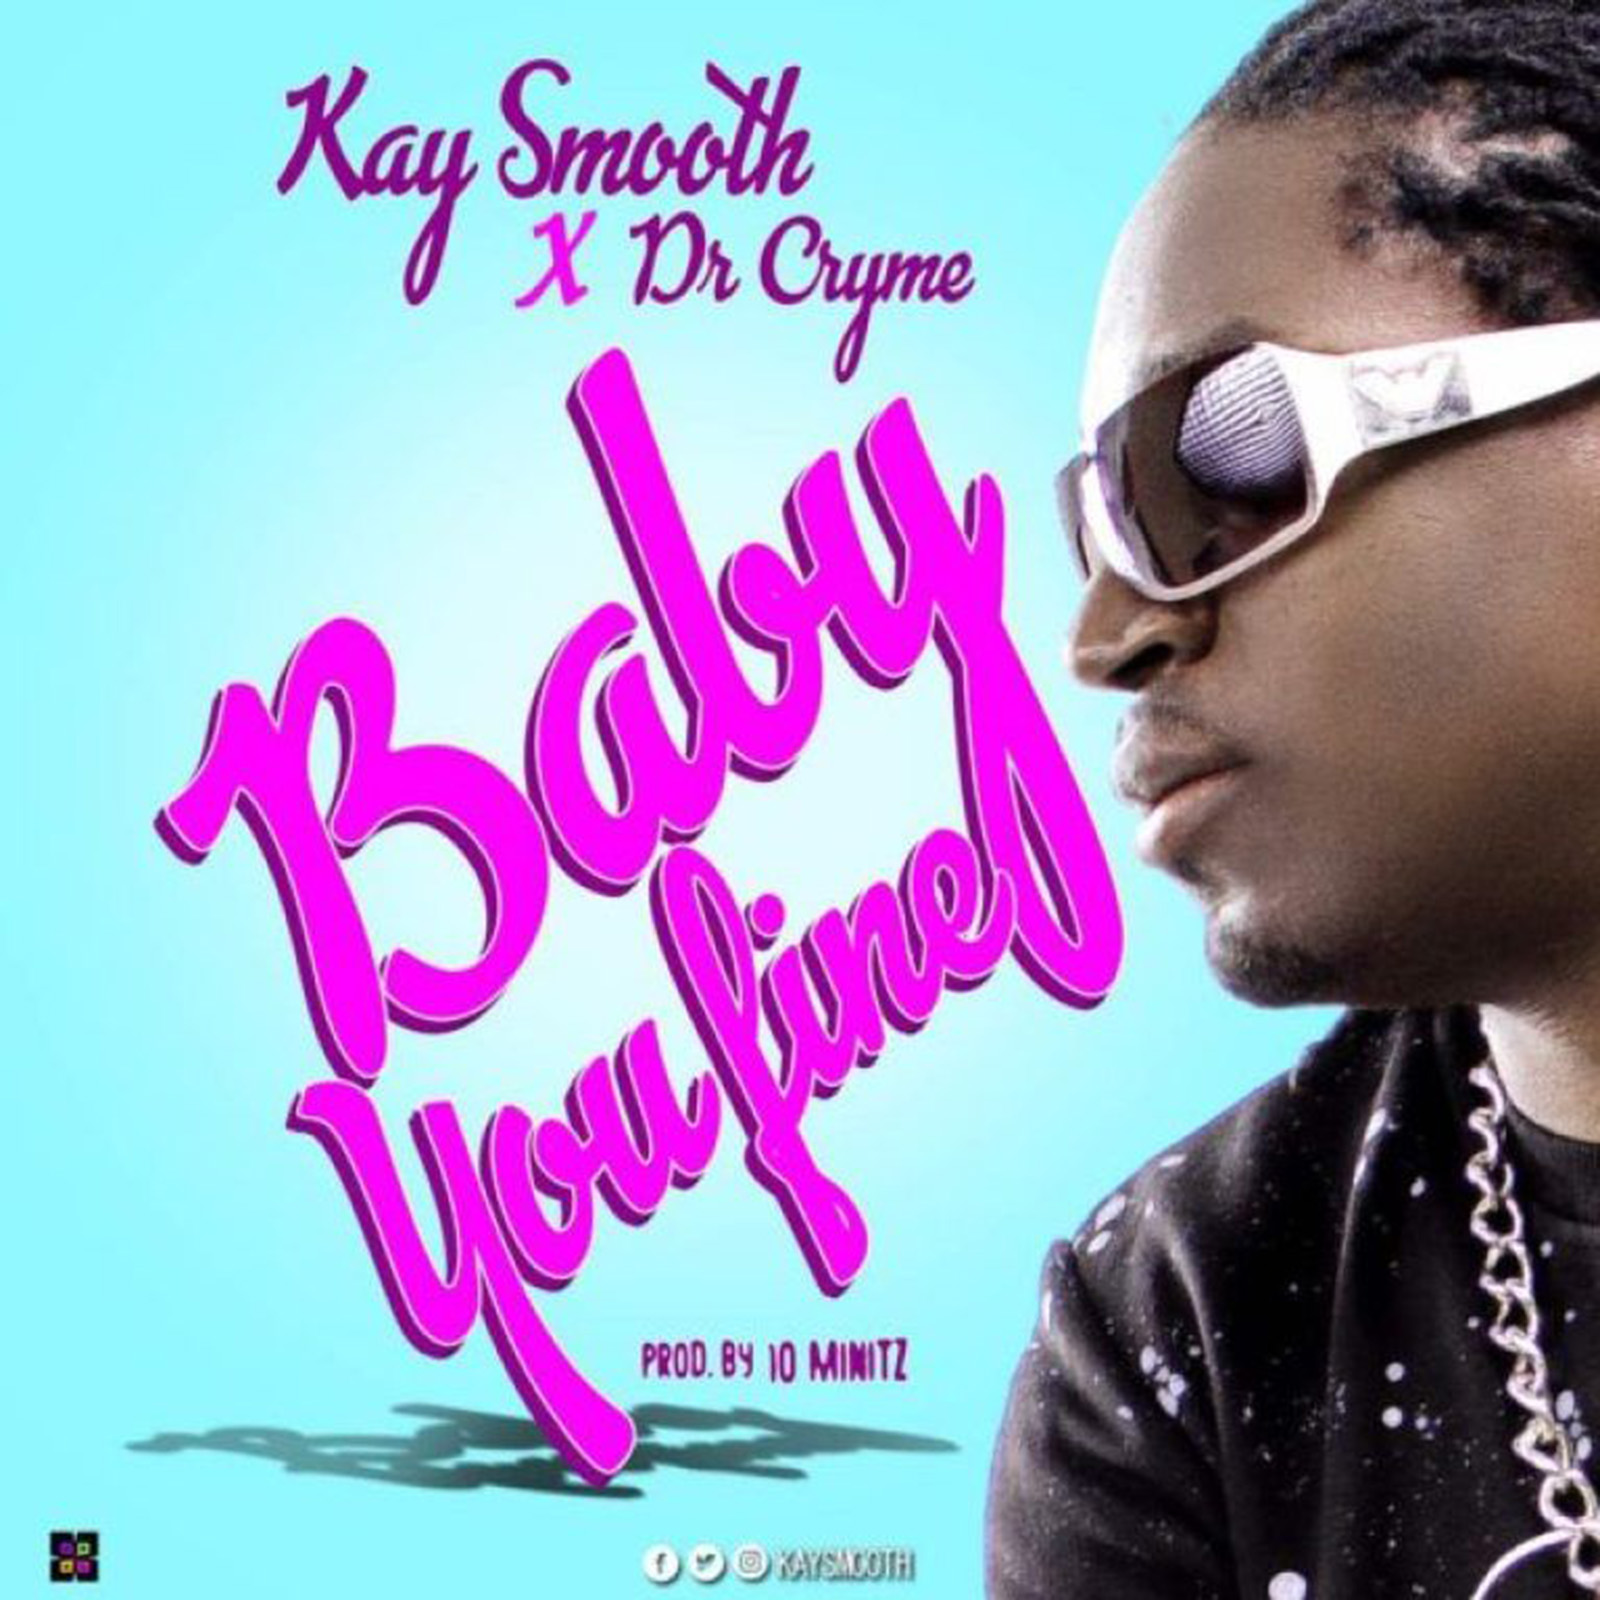 Baby You Fine by Kay Smooth feat. Dr. Cryme